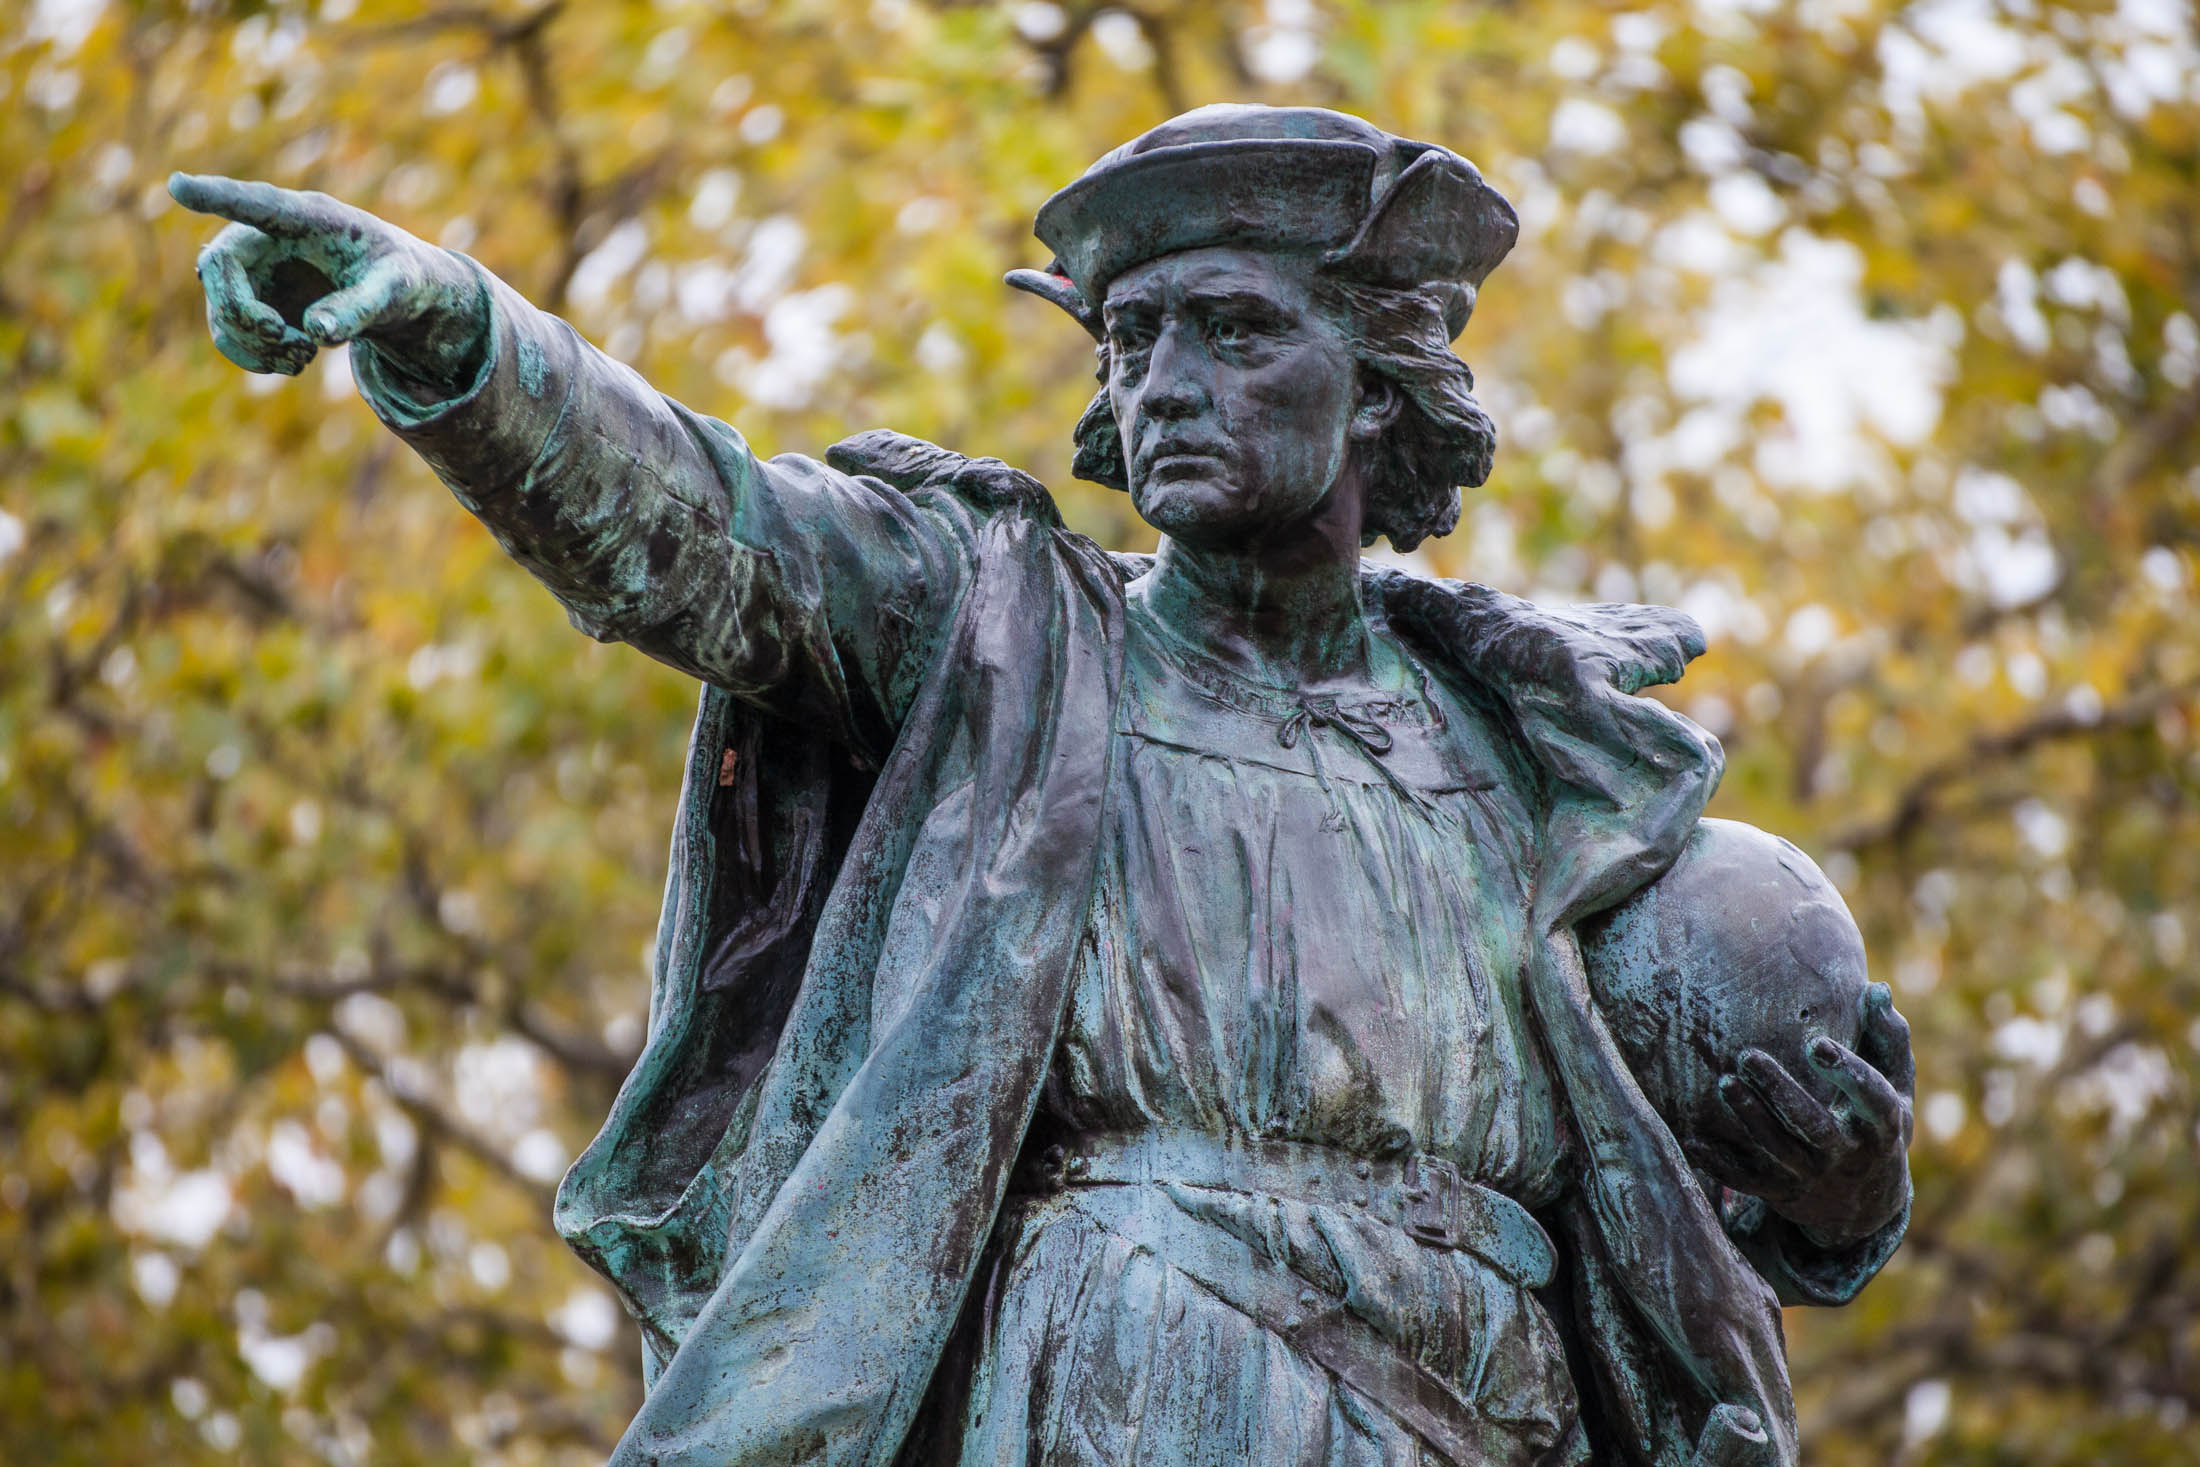 File:Christopher Columbus Statue close-up.jpg - Wikimedia Commons